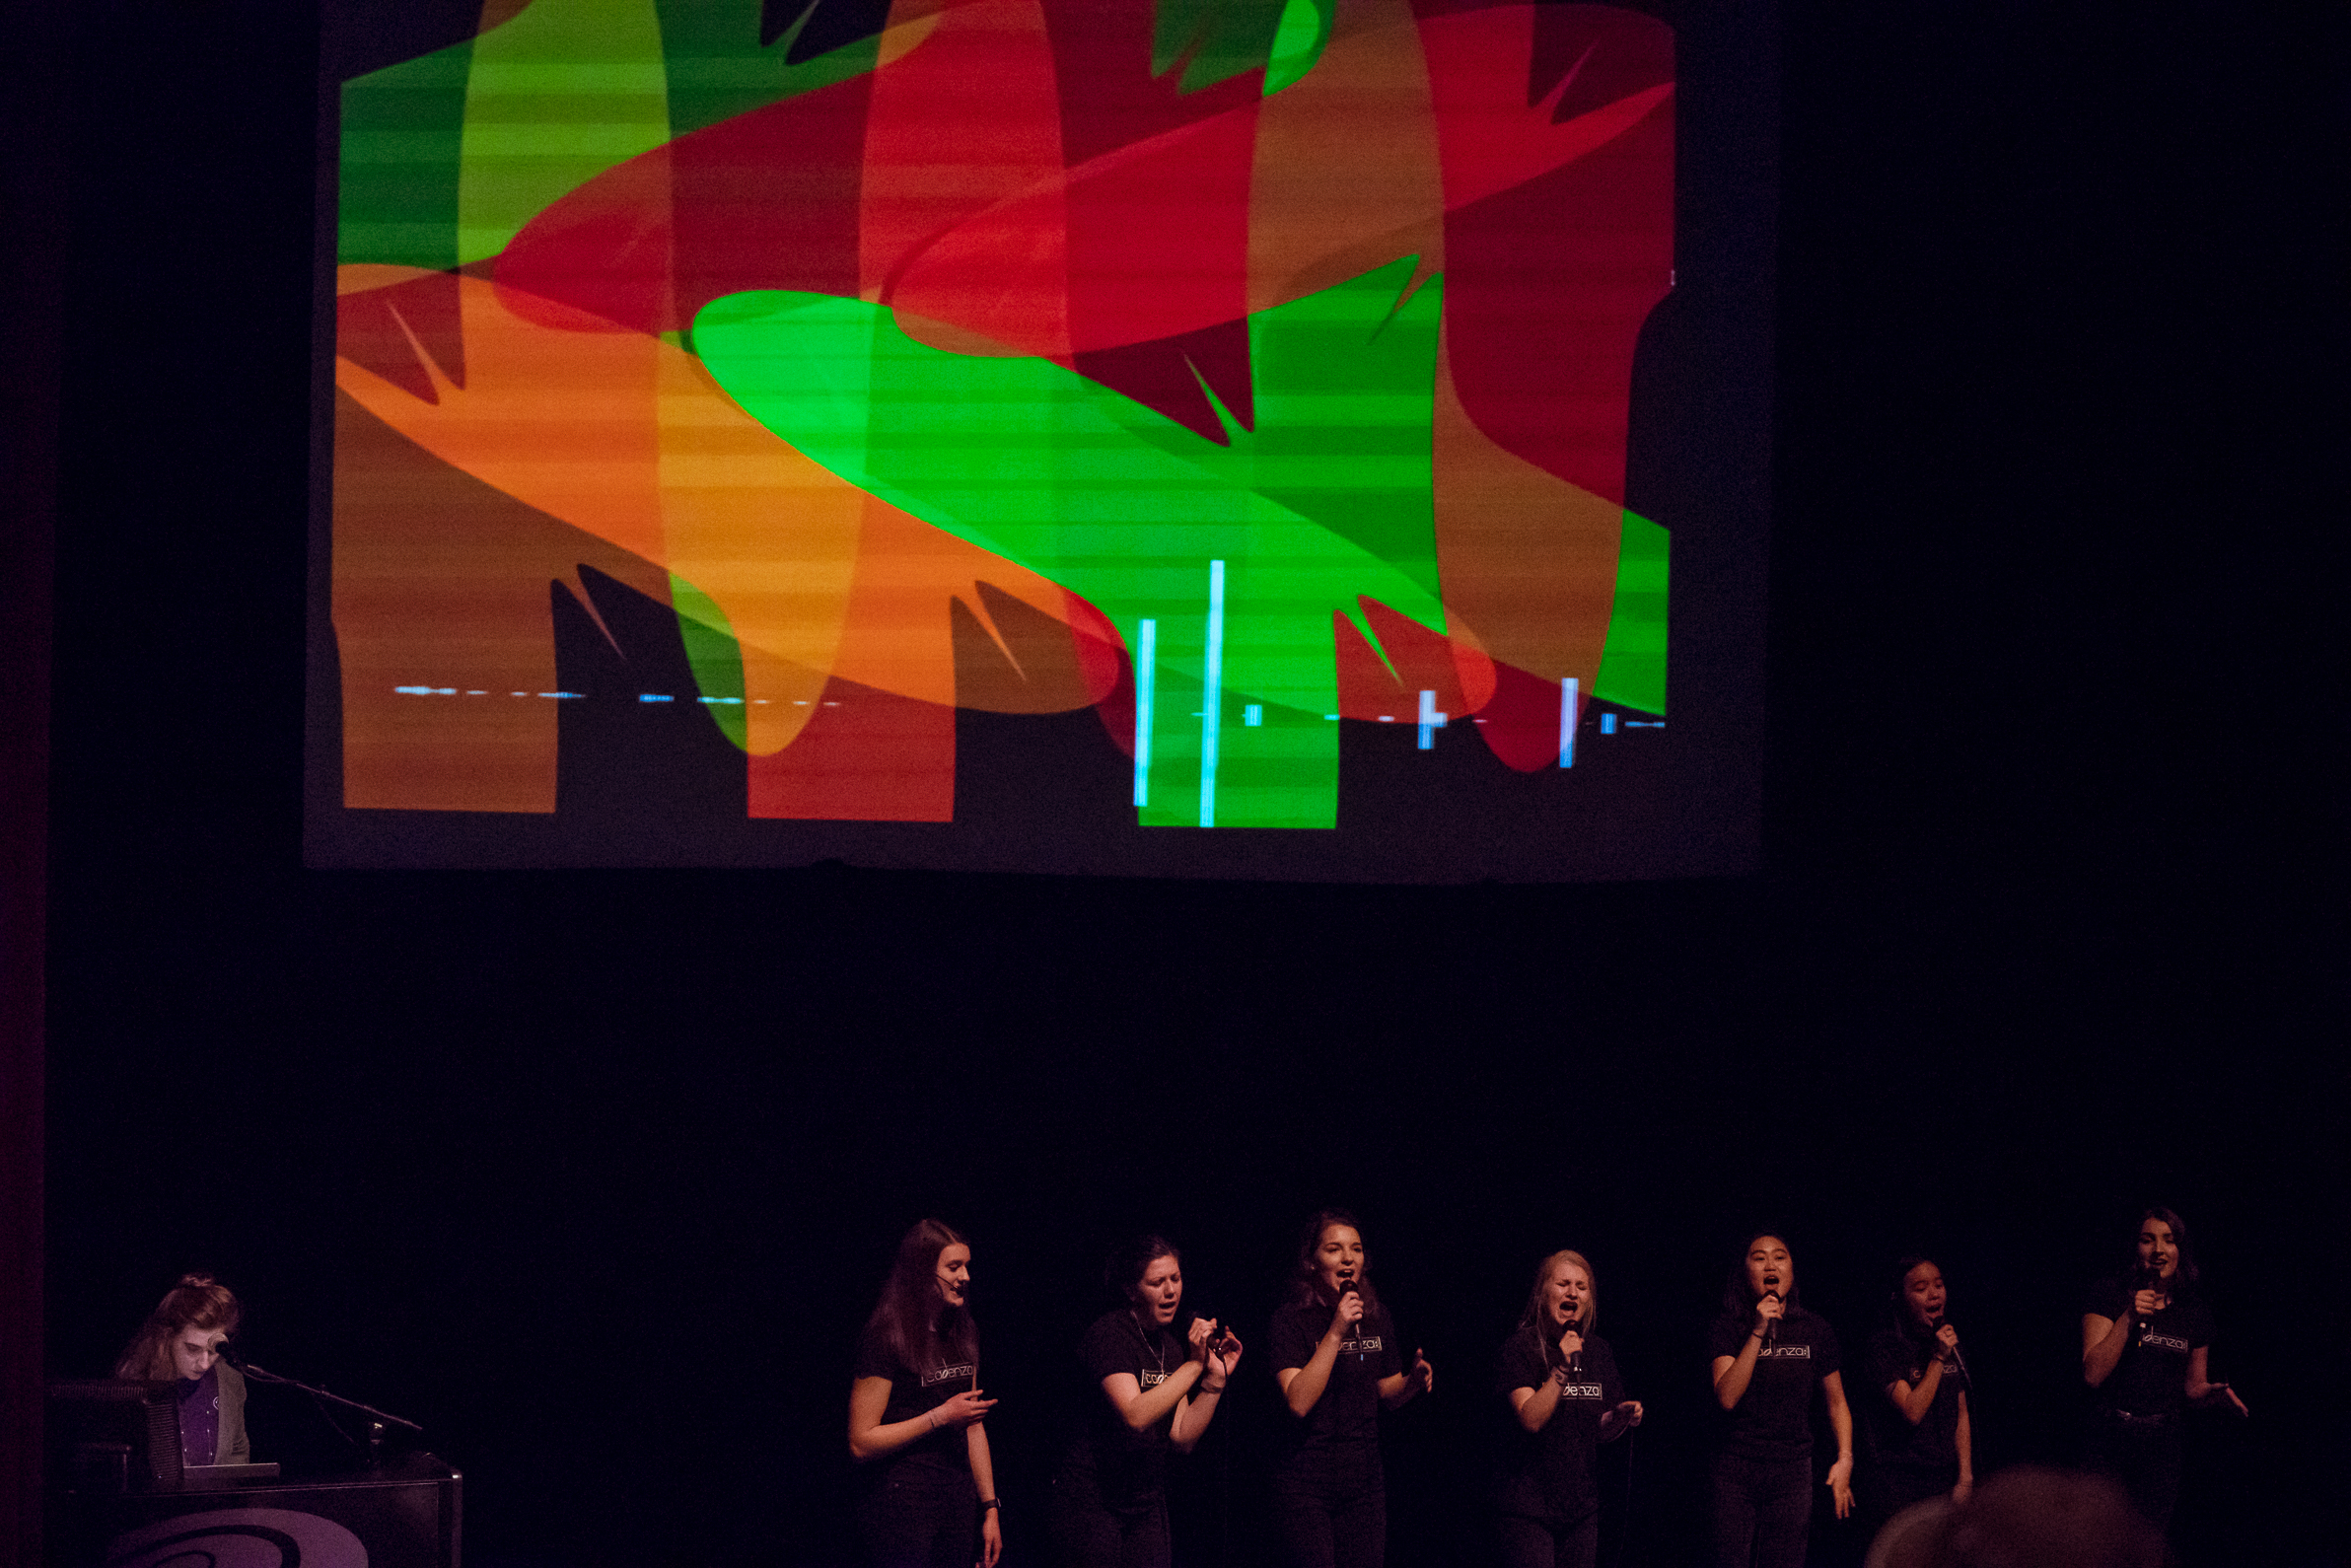 Members of St. Thomas' singing group "Cadenza" perform at the Science Museum of Minnesota during a recent Code and Chords performance.